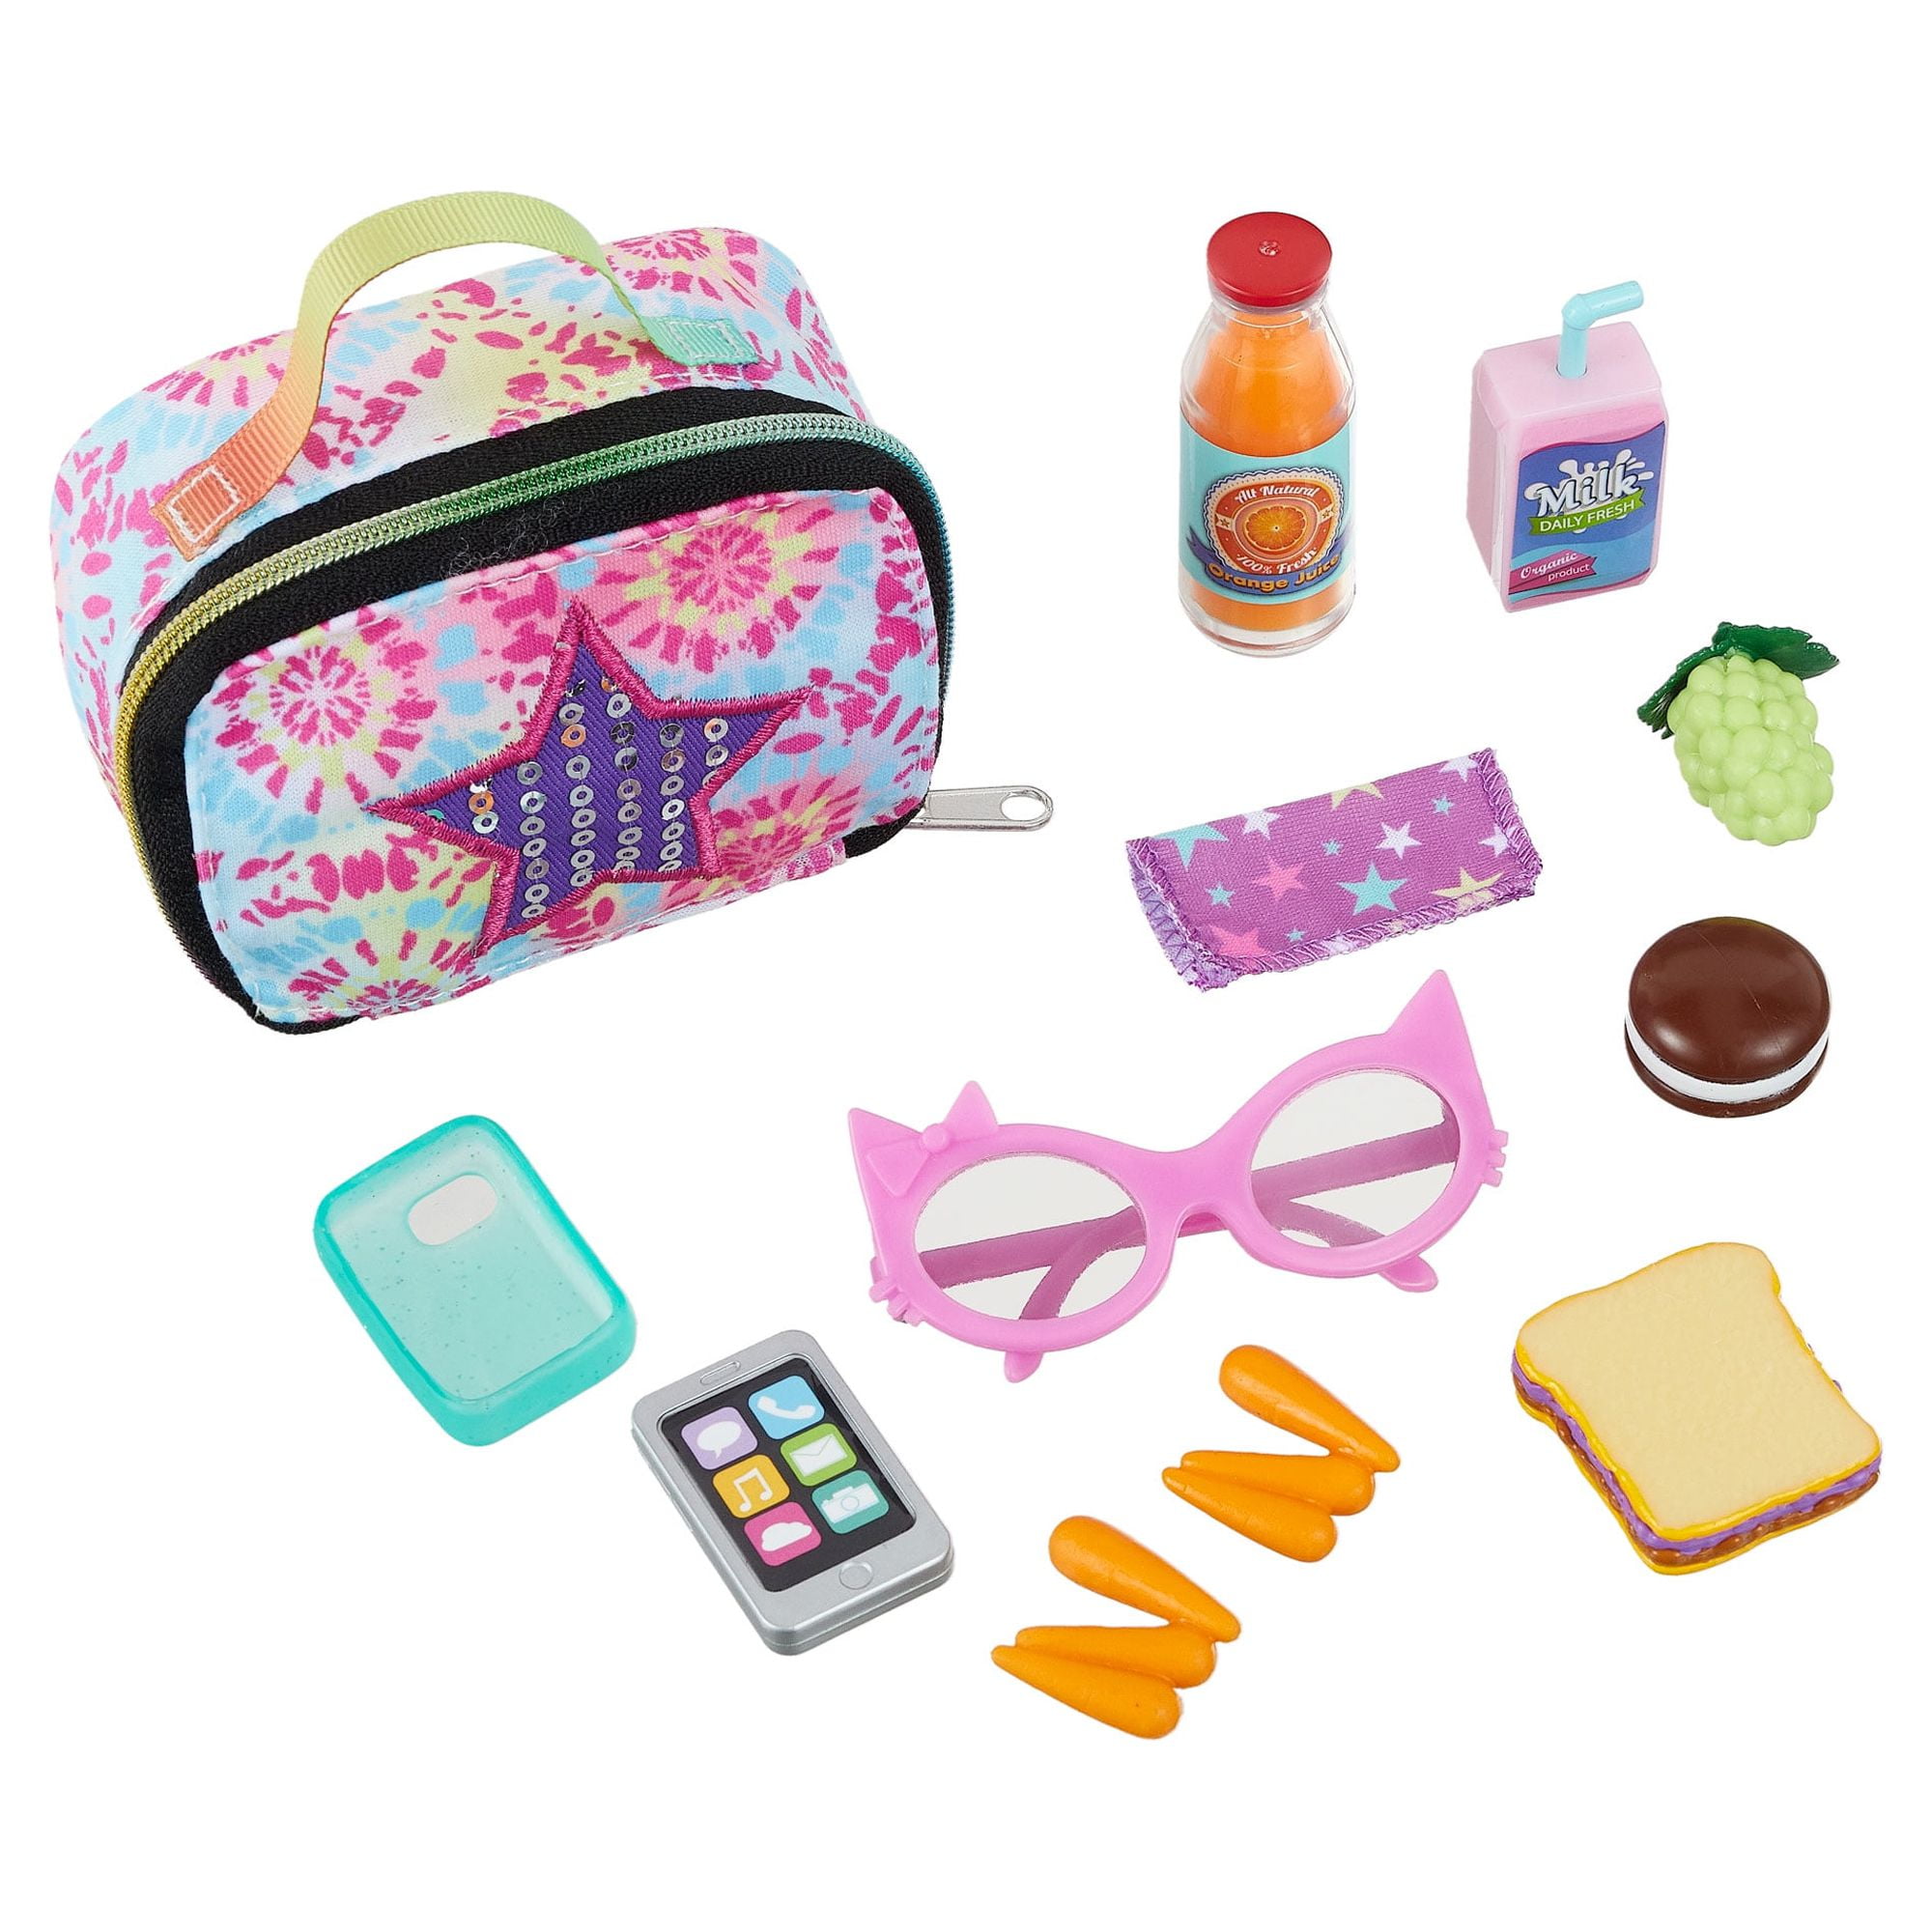 The Best Lunchbox Gear for Kids - Live Simply